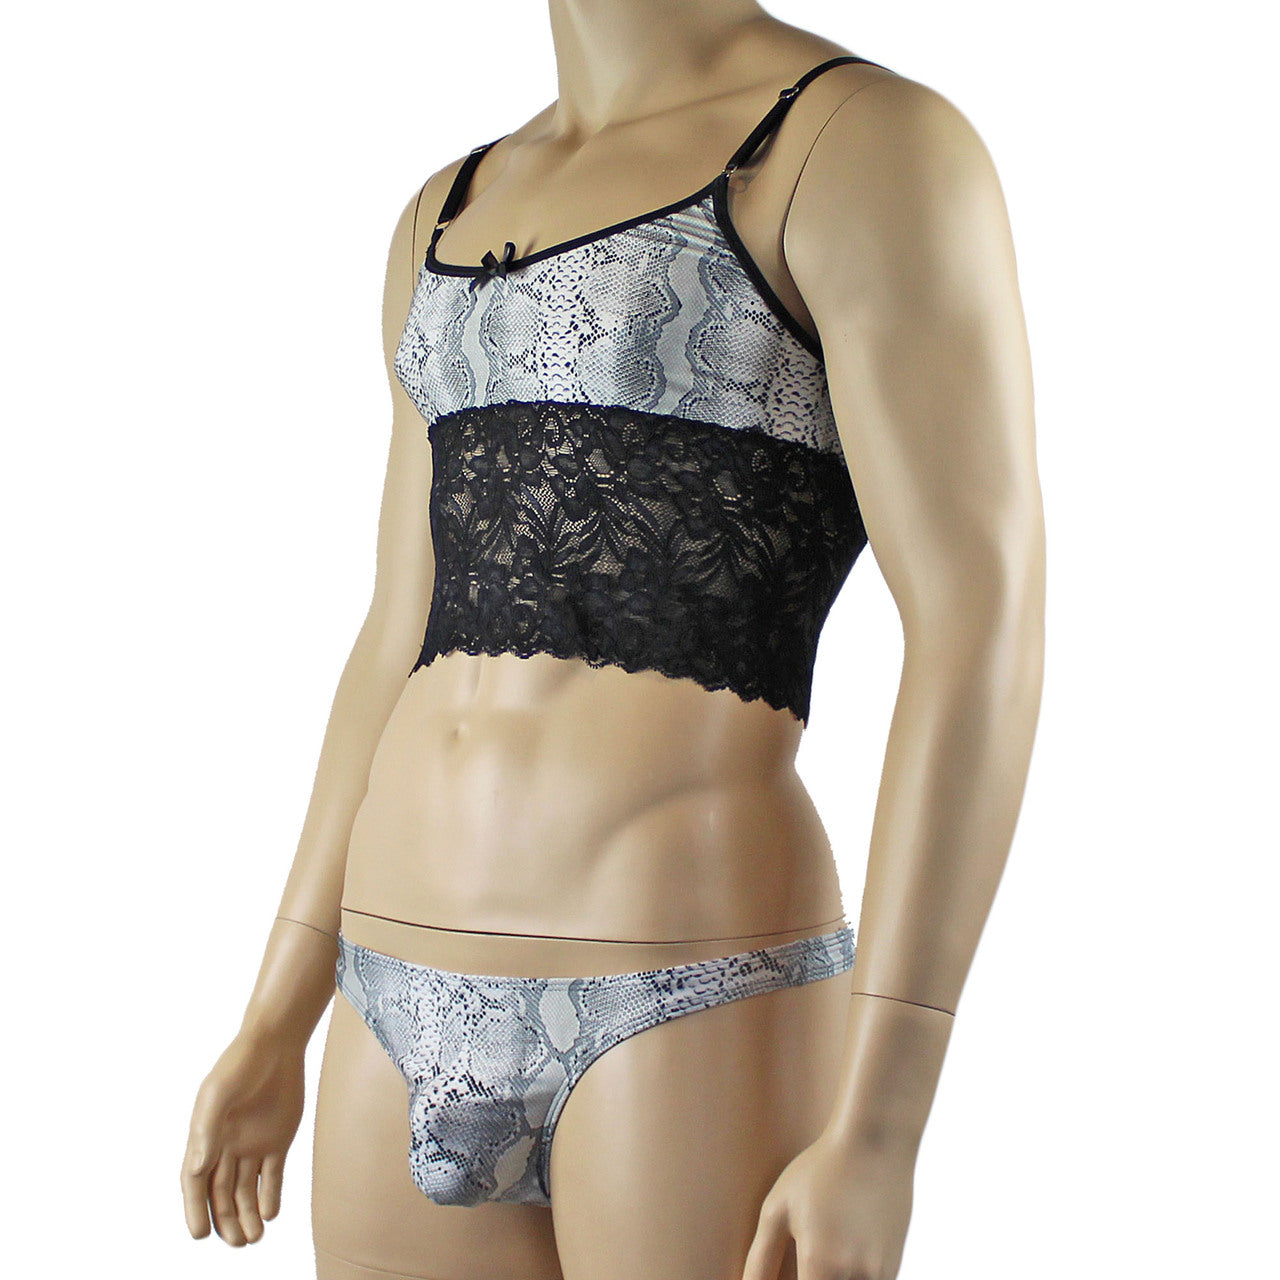 Mens Bra Top Camisole and Thong in Grey Snake Print & Black Lace